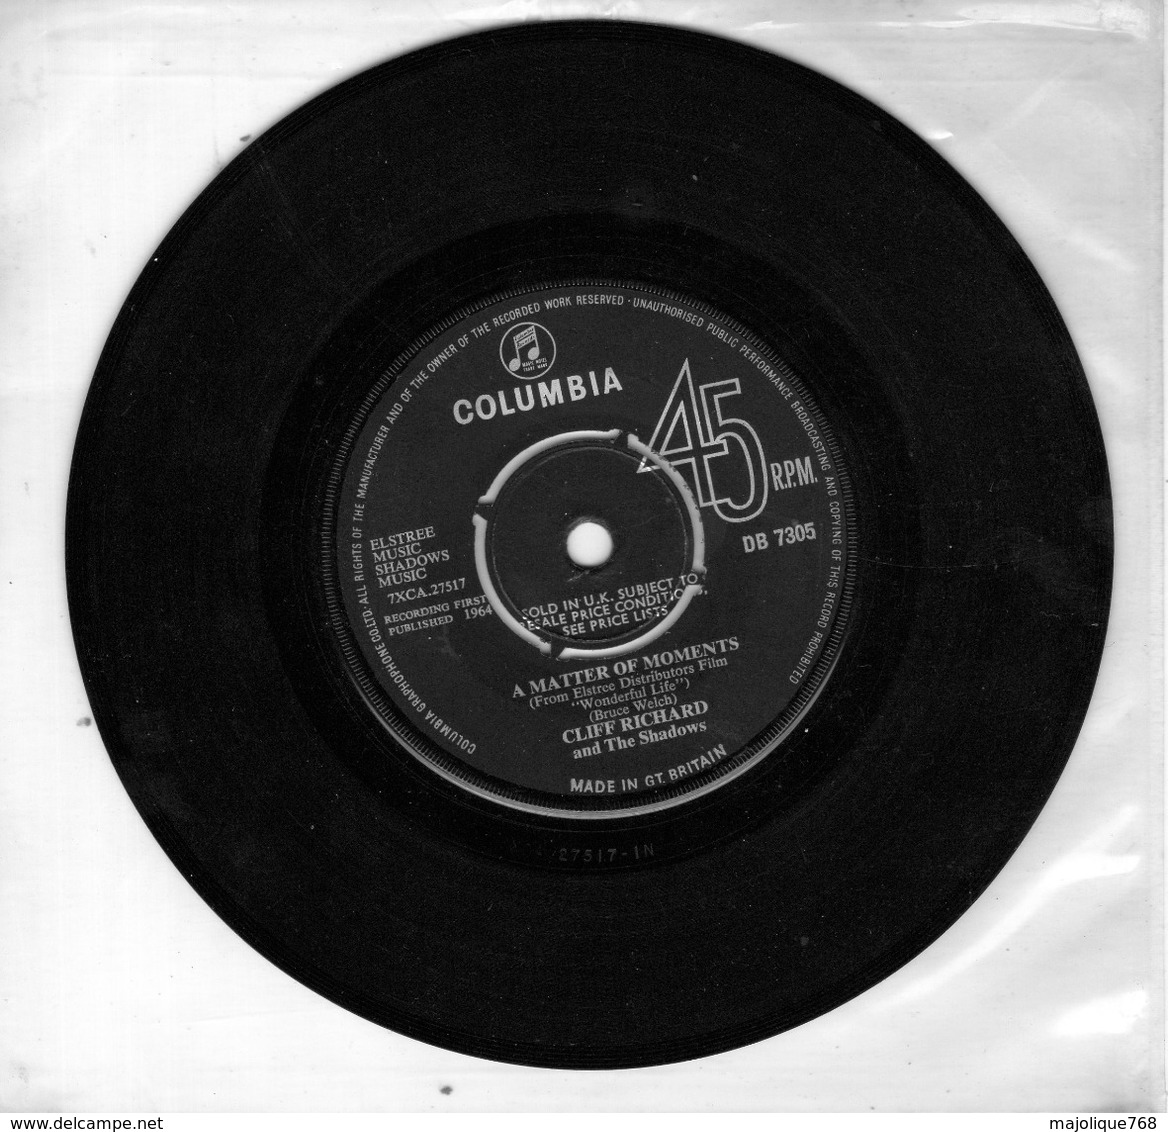 Cliff Richard And The Shadows - On The Beach - A Matter Of Moments - Columbia DB 7305 - 1964 - - Rock